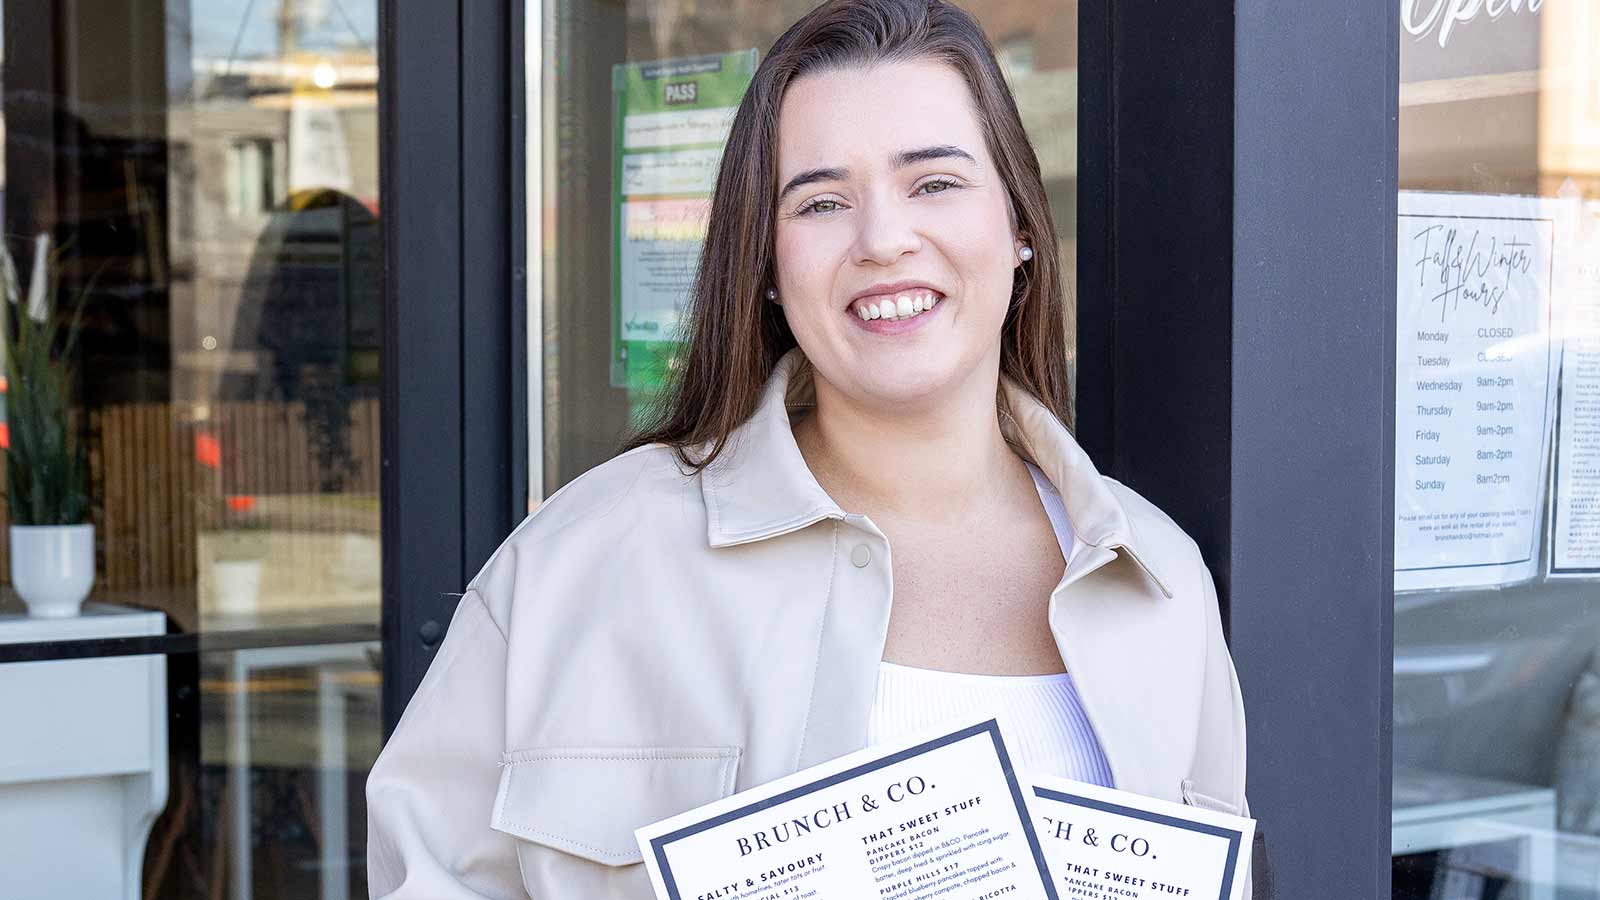 Owner Sarah Pascoal smiling and holding menus outside of restaurant